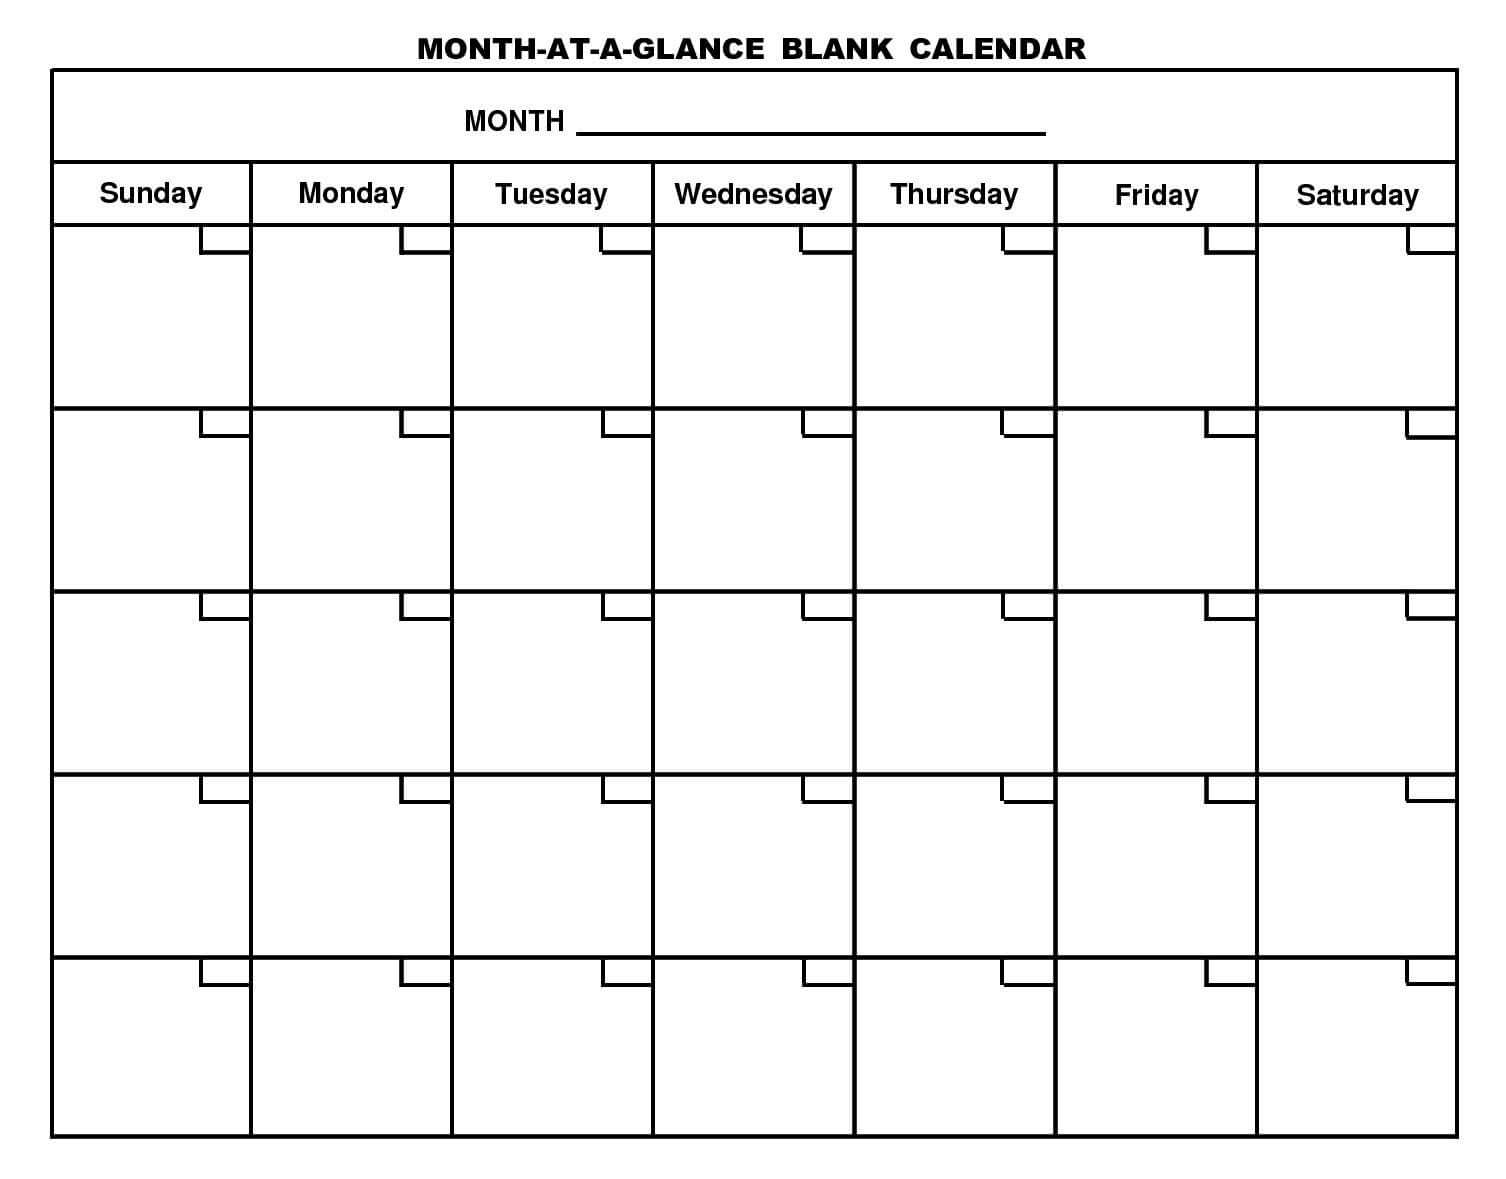 Month At A Glance Blank Calendar | Monthly Printable Calender Regarding Month At A Glance Blank Calendar Template